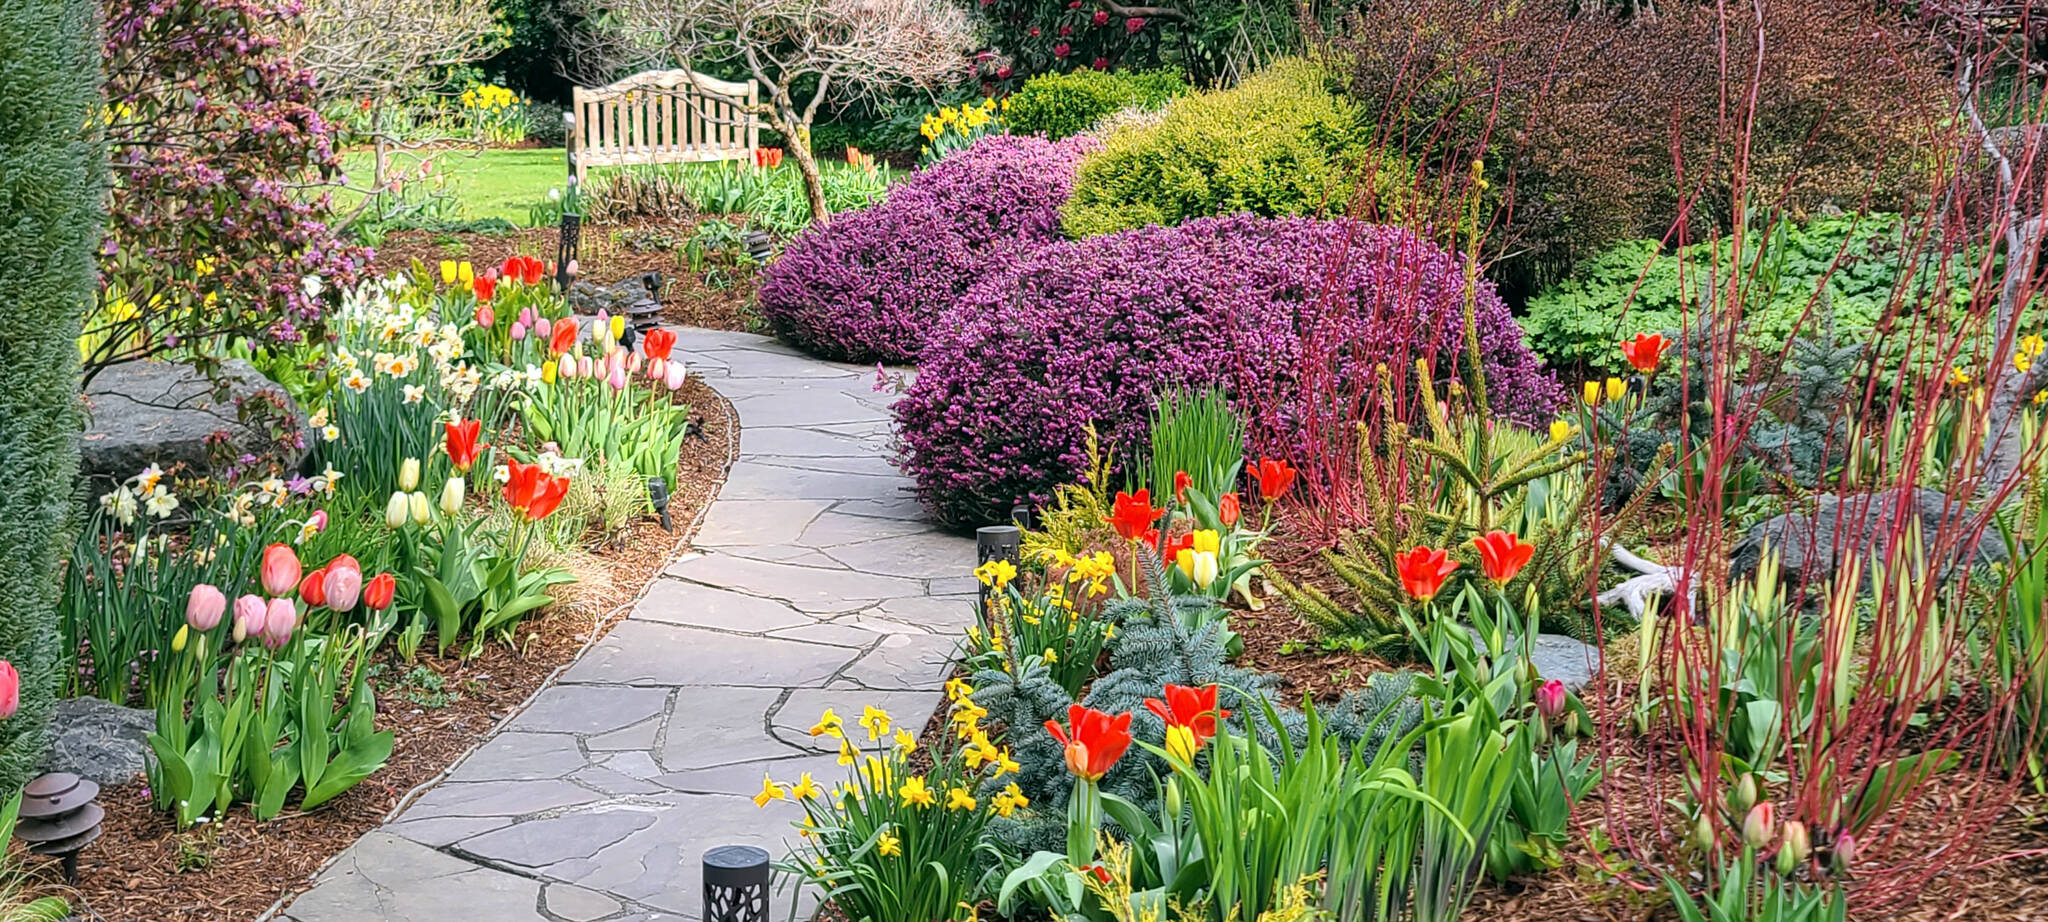 Spring bulbs and plants lead garden guests along pathways with tempting colors. (Andrew May/For Peninsula Daily News)